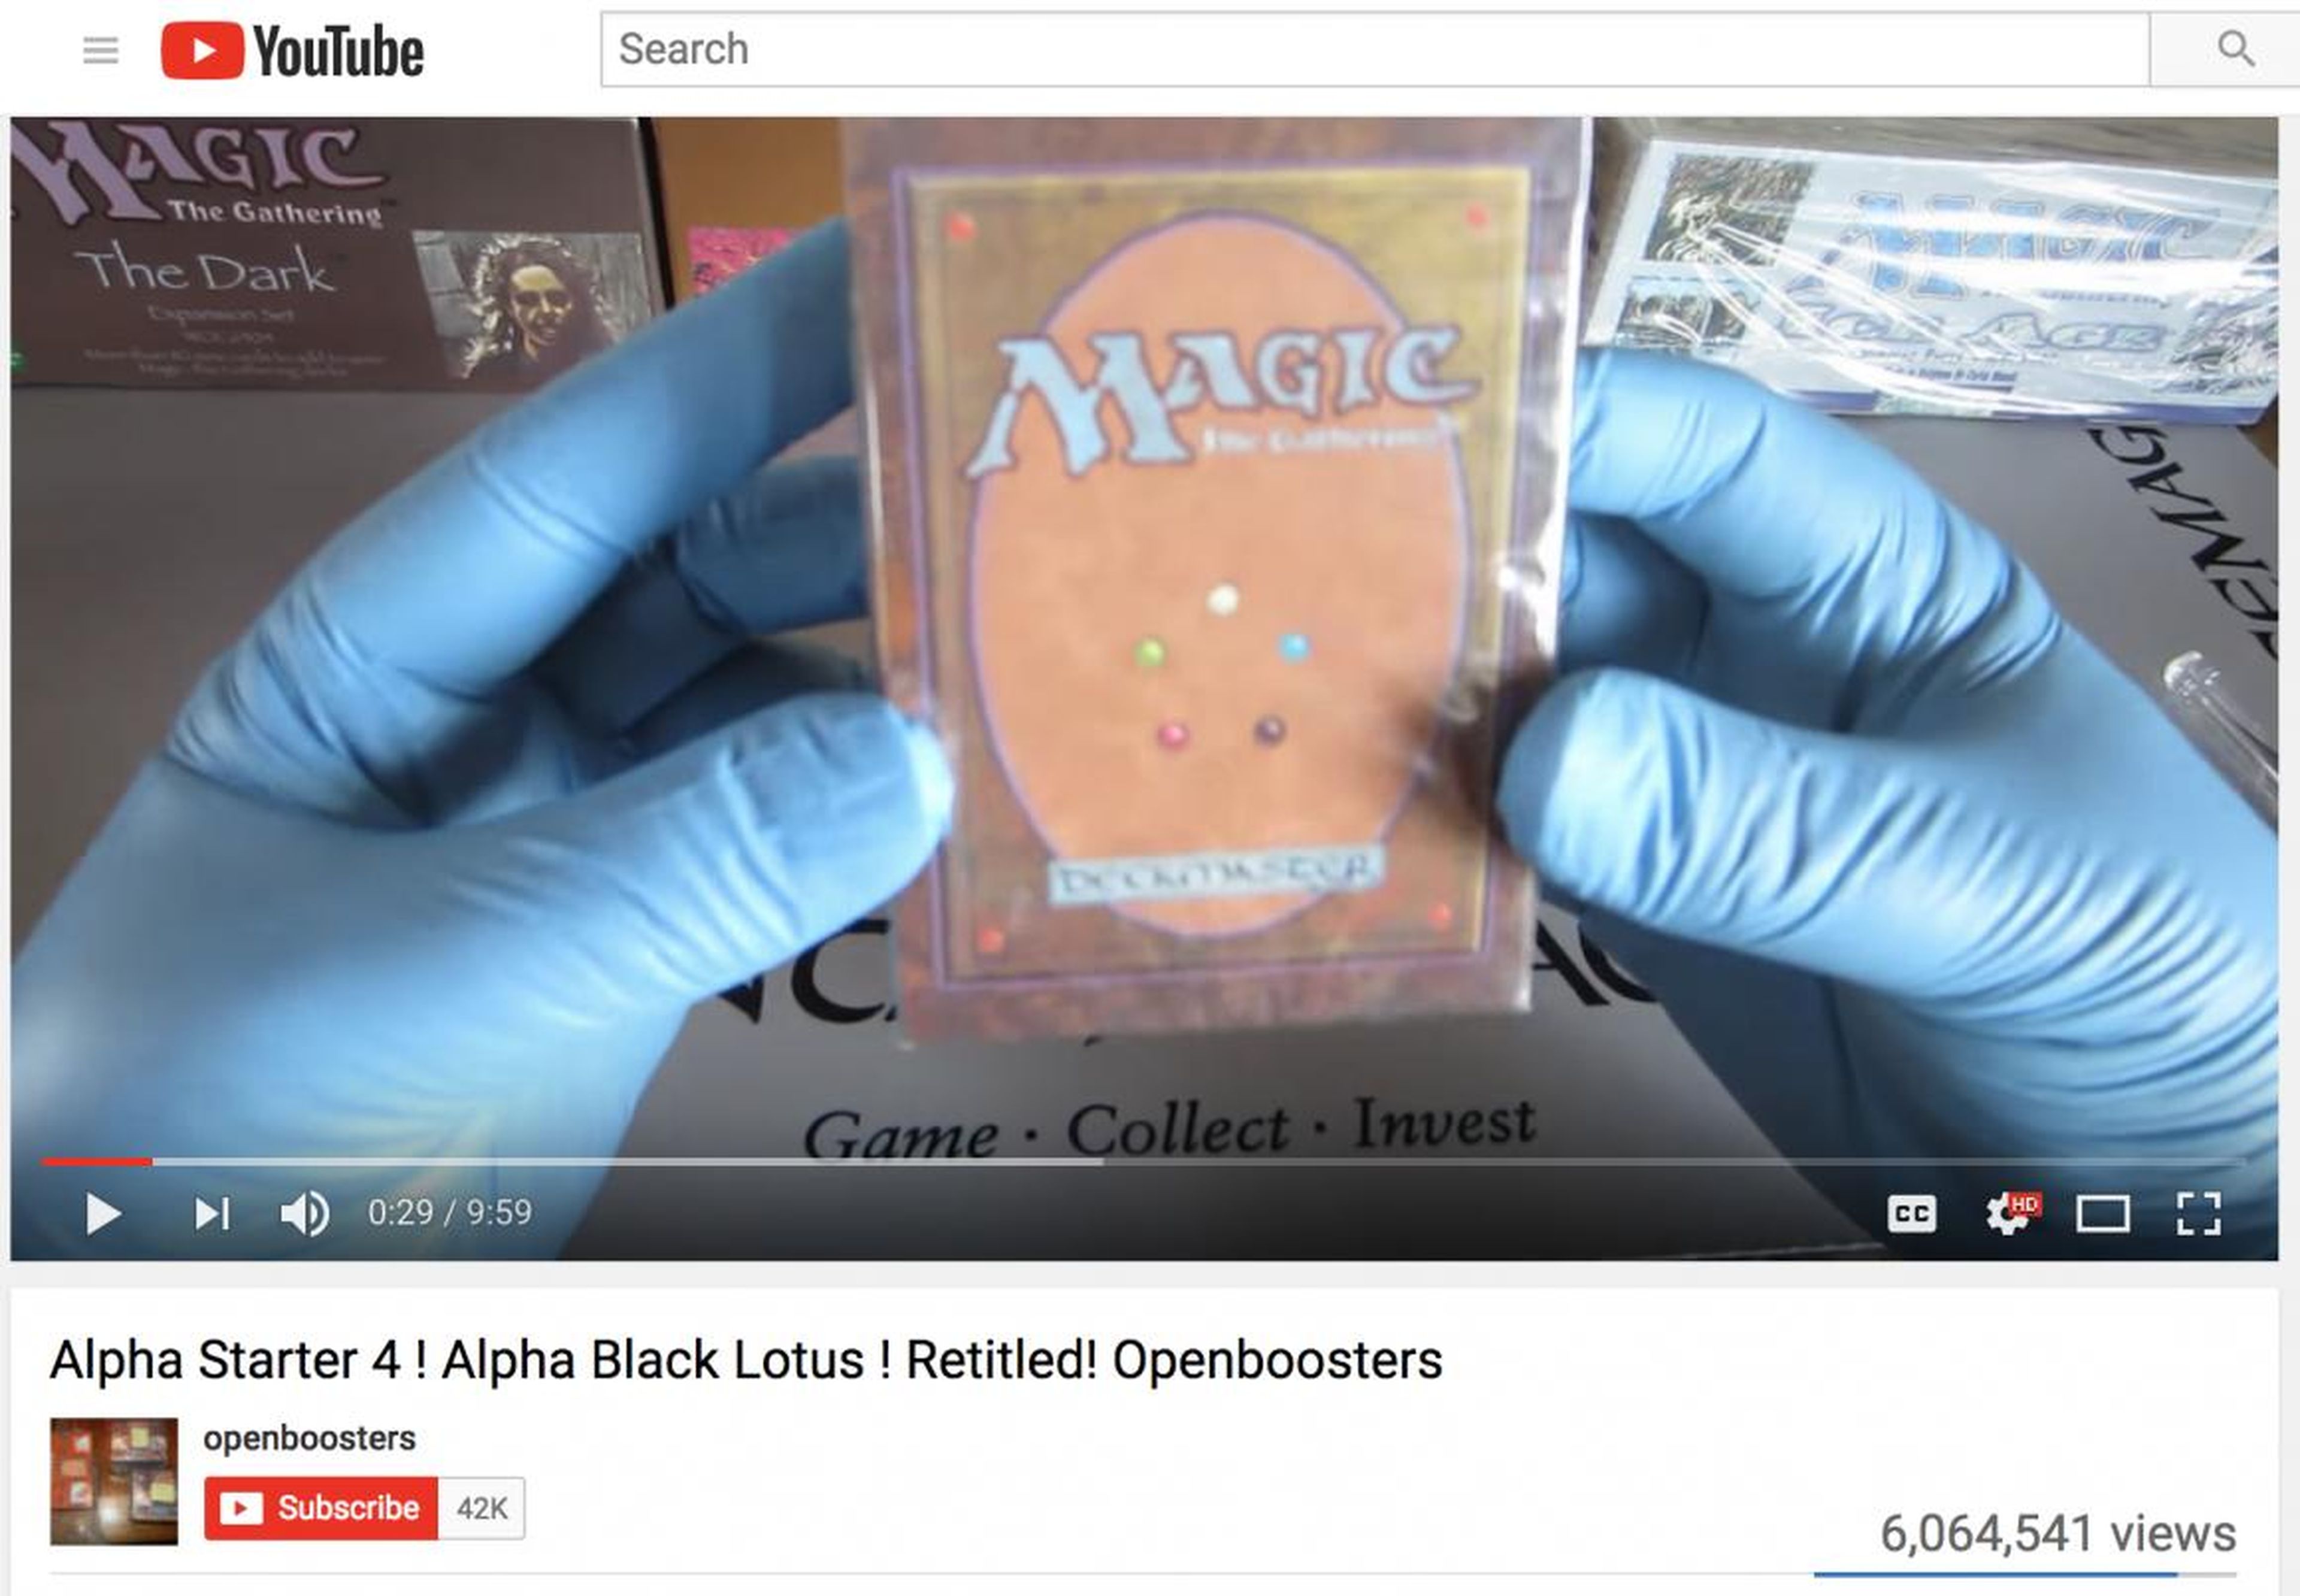 One YouTube video in which a collector discovers a rare "Magic" card in a vintage deck has more than 6 million views.